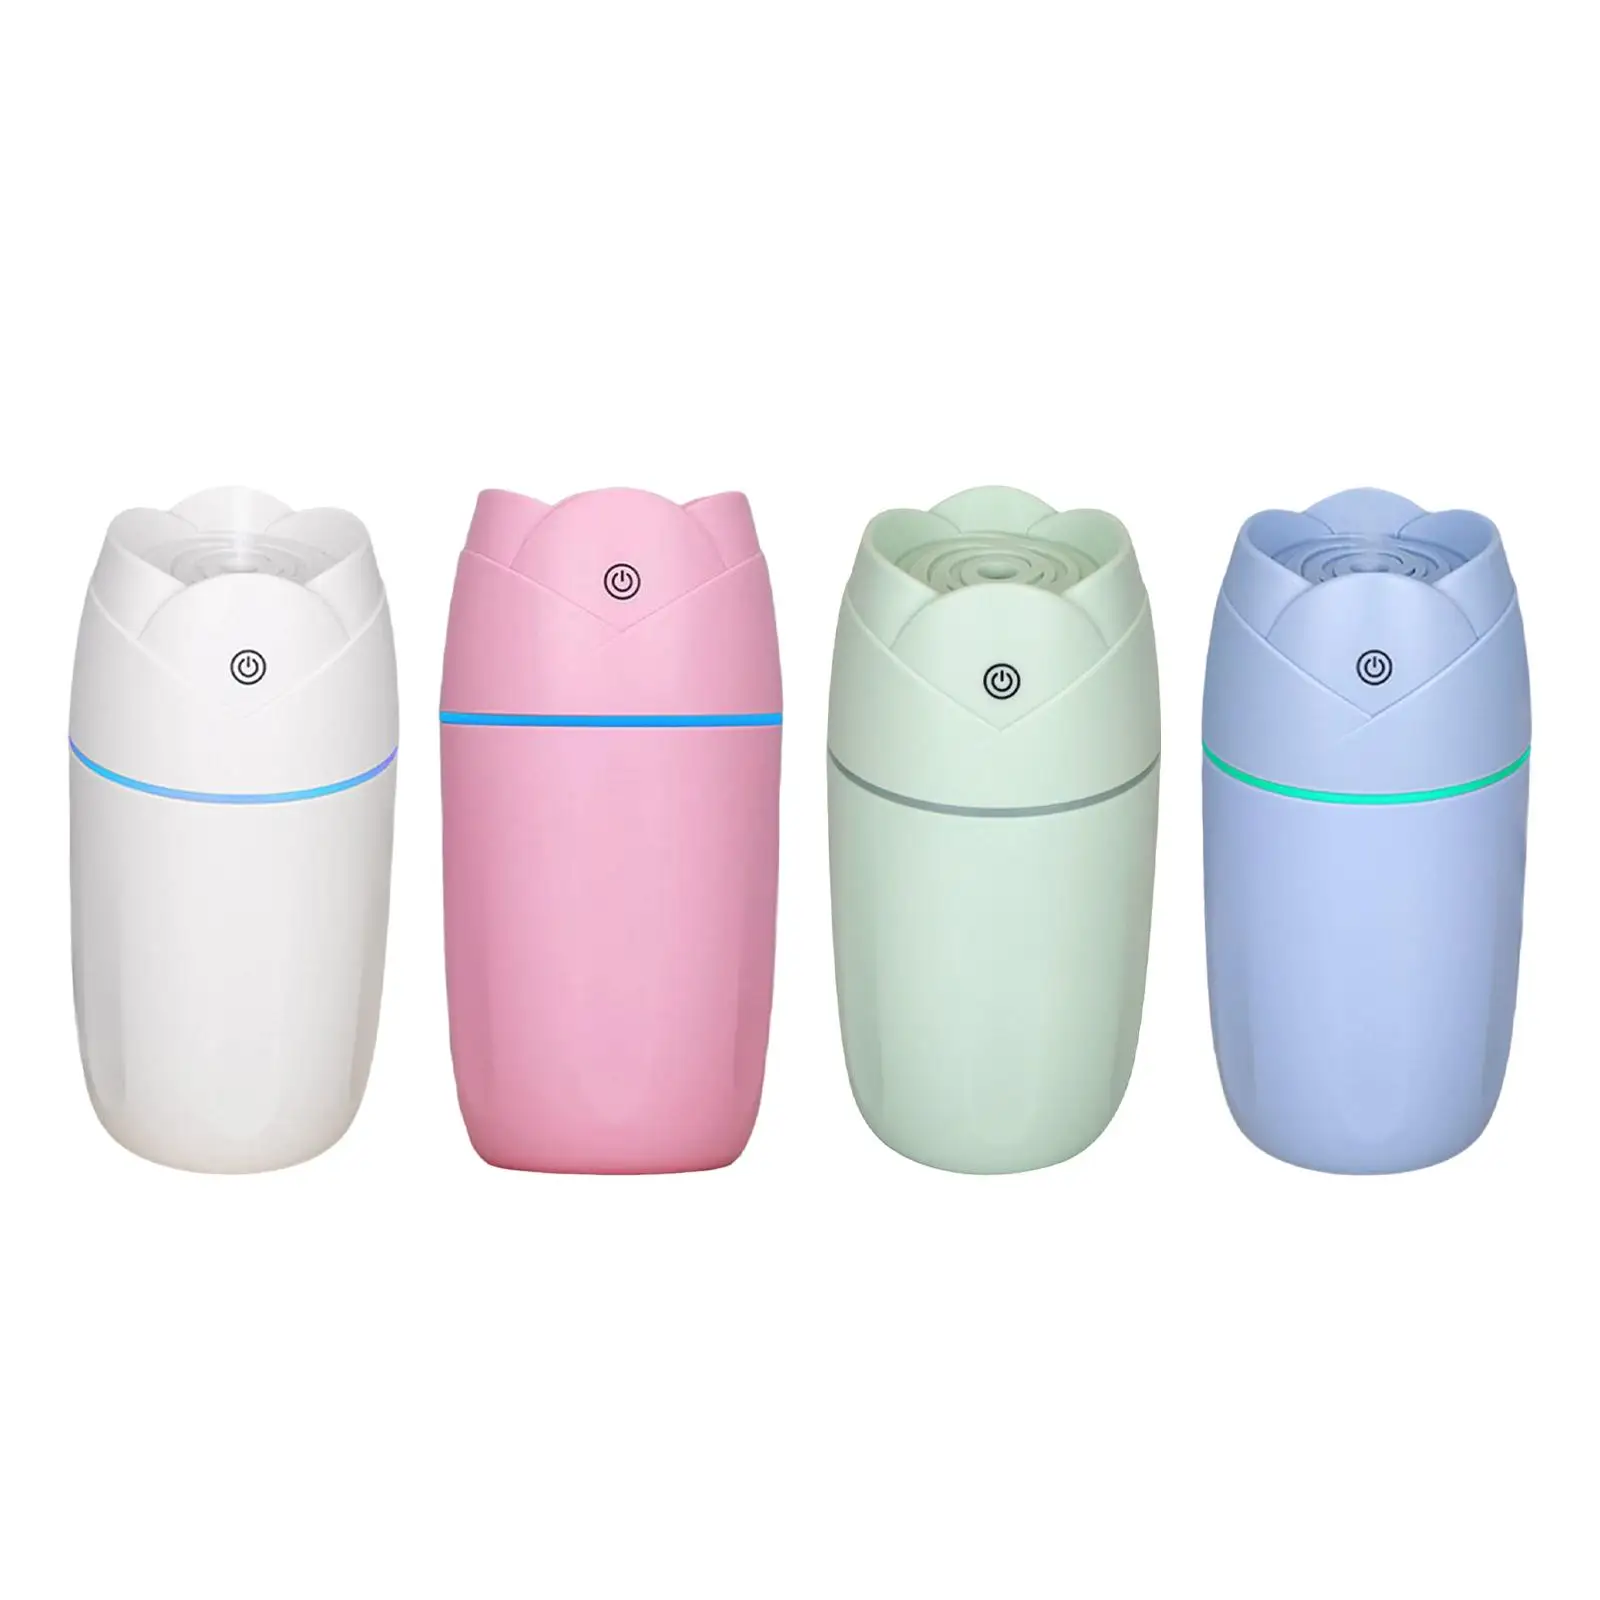 Portable Cool Mist Humidifier Silent Smart with 7 Color LED Night Light Mist Maker Diffuser Aroma Diffuser for Kids Room Bedroom